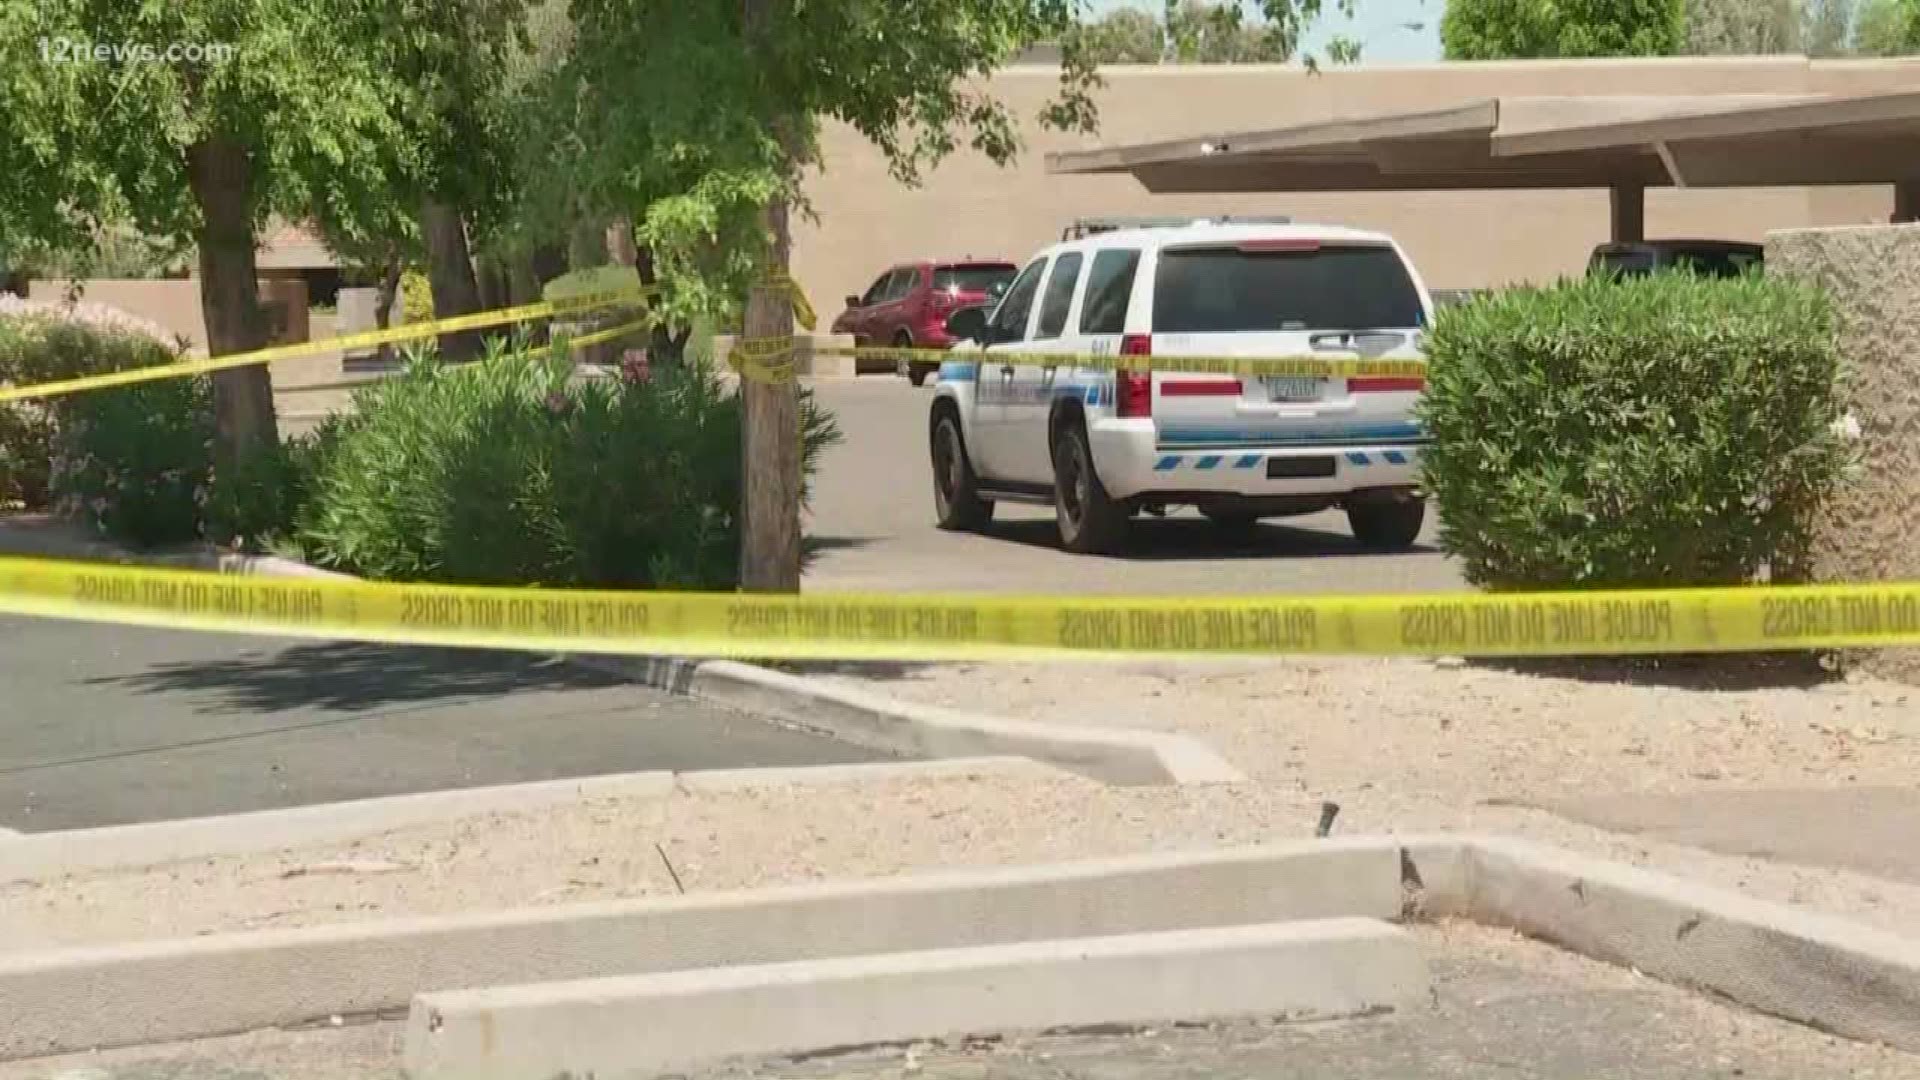 Investigators confirmed a connection between both cases, but they did not specify what that connection is. A former Phoenix police officer talks about the investigation.